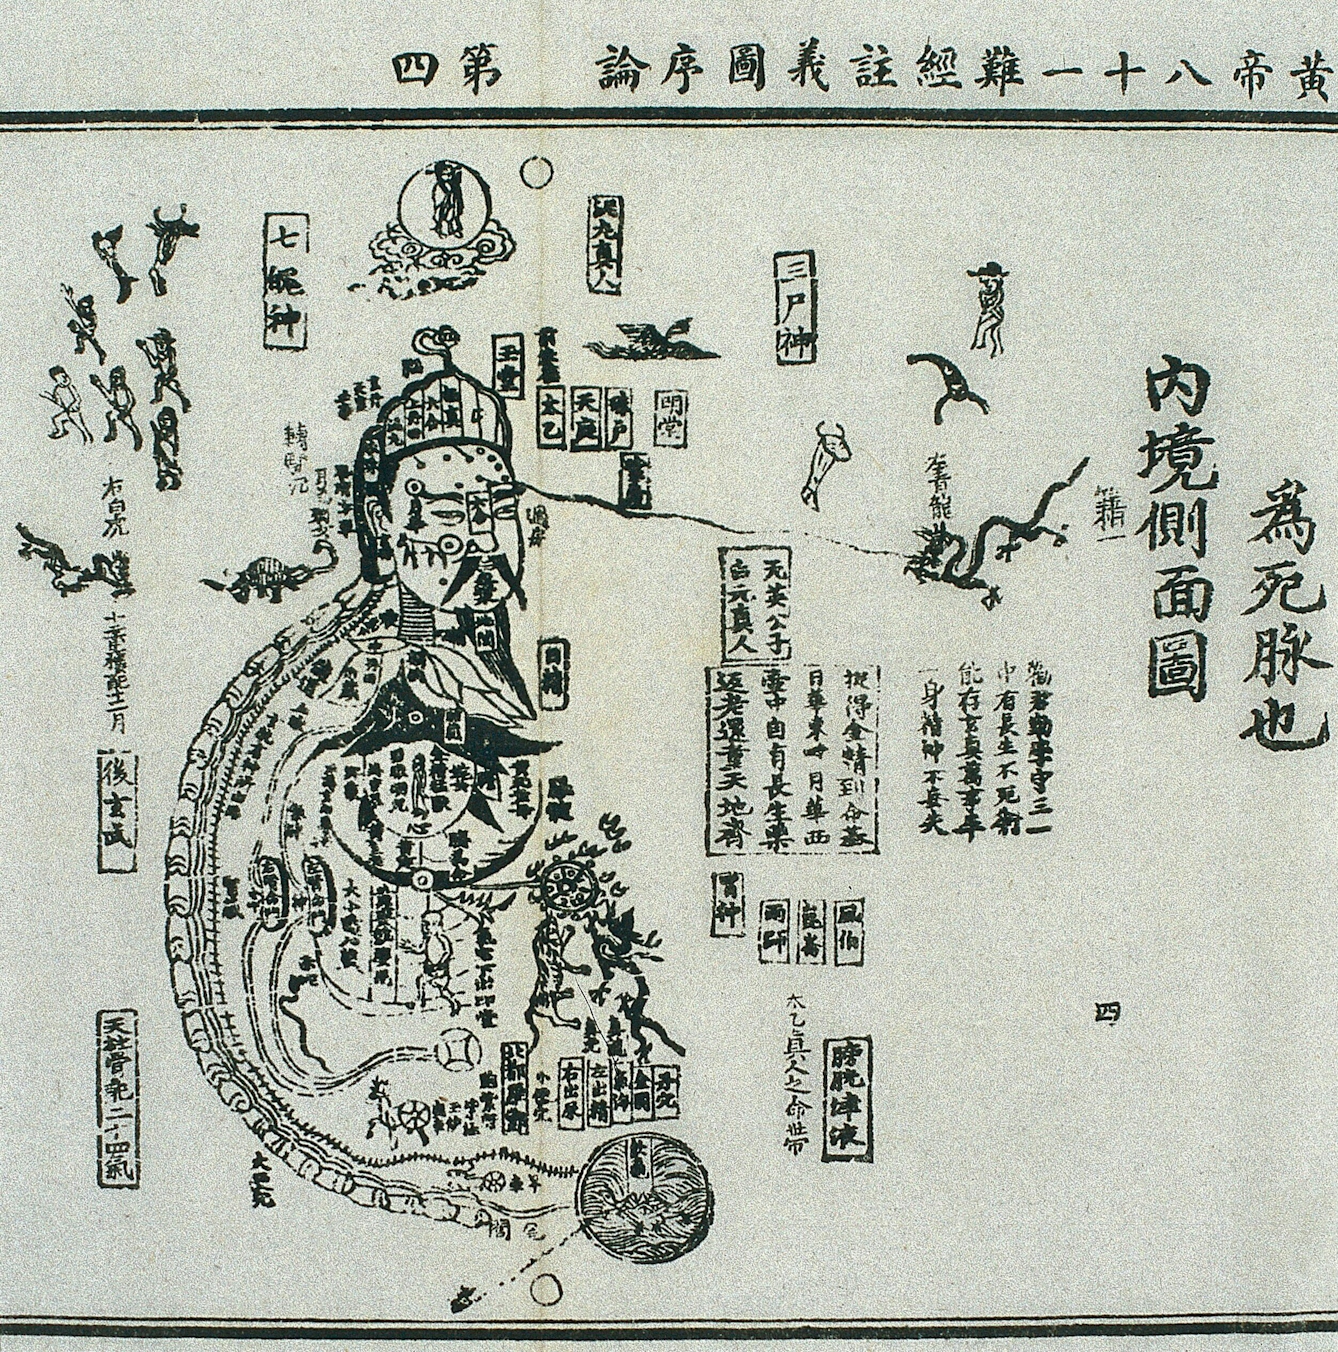 Fifteenth century Chinese woodblock illustration from the Daoist Canon (Daozang), showing the internal topography or inscape (neijing) of the human body according to Daoist teachings. Extracts from Daoist texts are incorporated into the design. Around the human figure are depictions of the Blue/Green Dragon (qing long), White Tiger (bai hu) and Red Sparrow (zhu que) and of Xuan Wu, God of the Northern Sky.